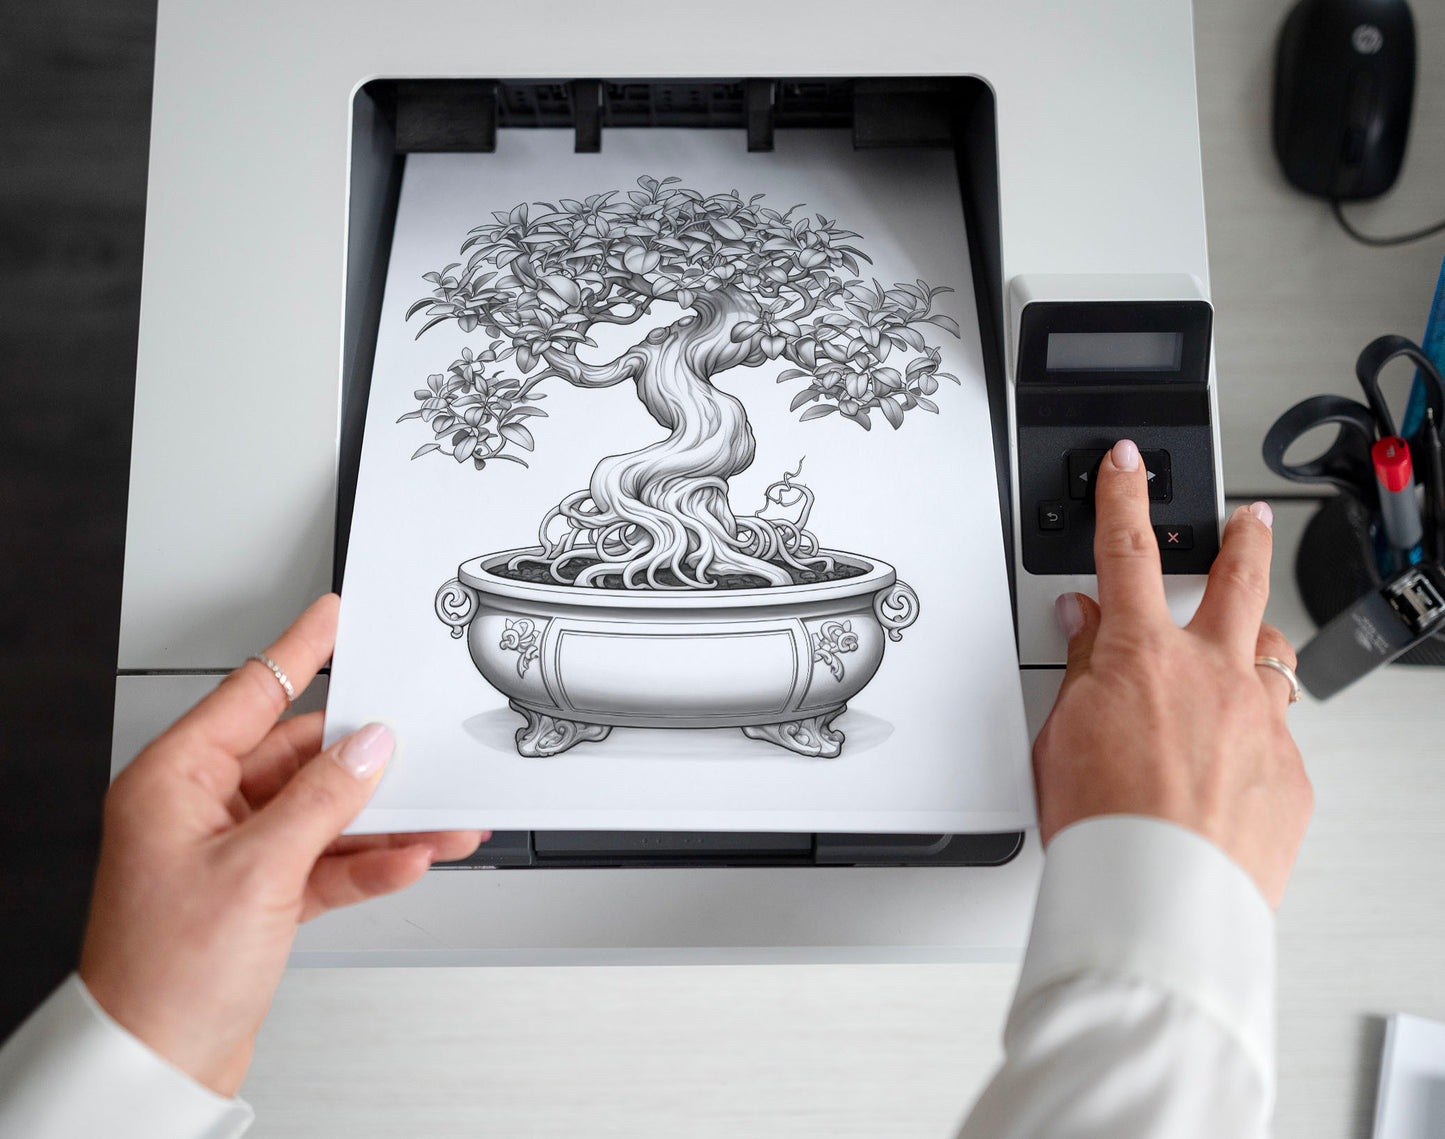 25 Bonsai Tree Grayscale Coloring Pages - Instant Download - Printable Dark/Light